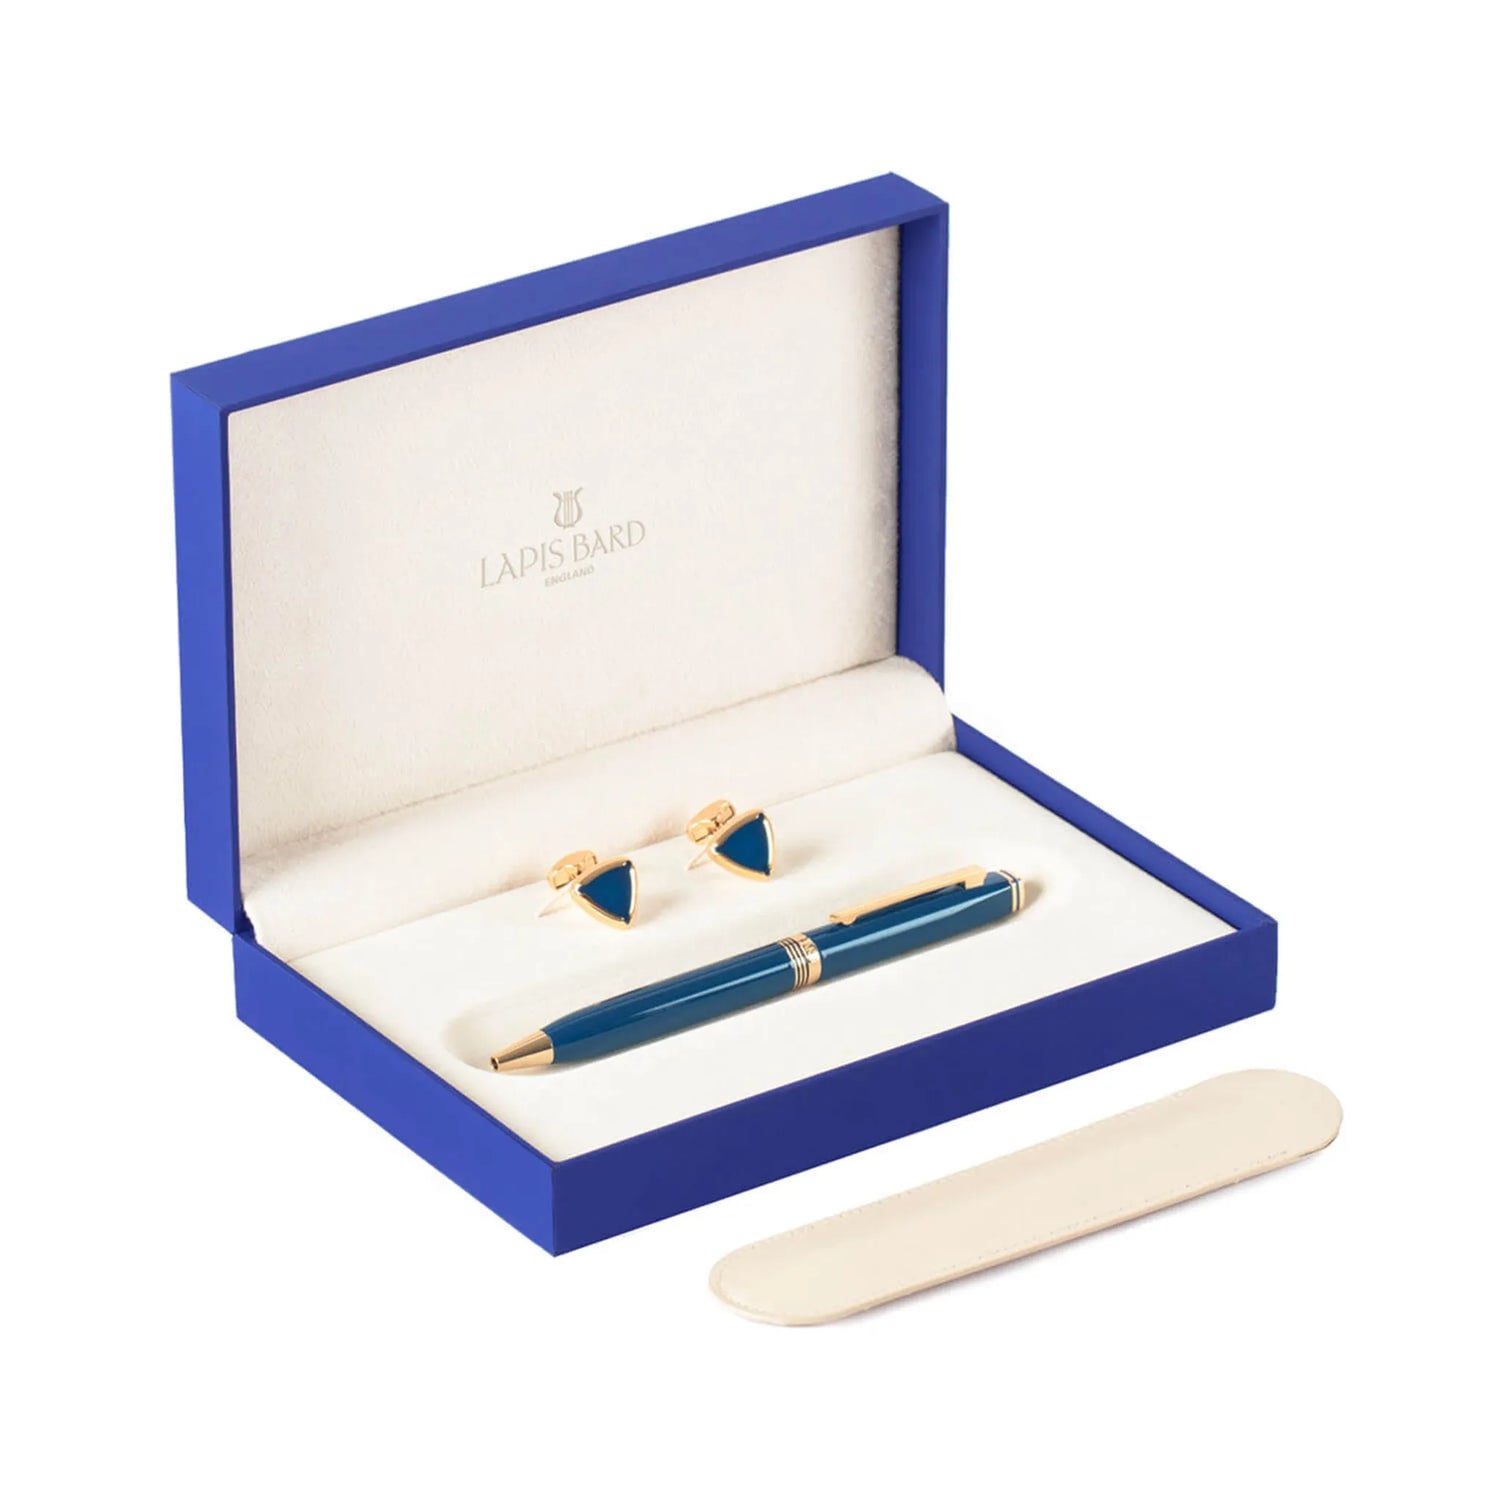 WP27929 -GIFT SET LAPIS BARD CONTEMPORARY BLUE WITH SHARD CUFFLINK